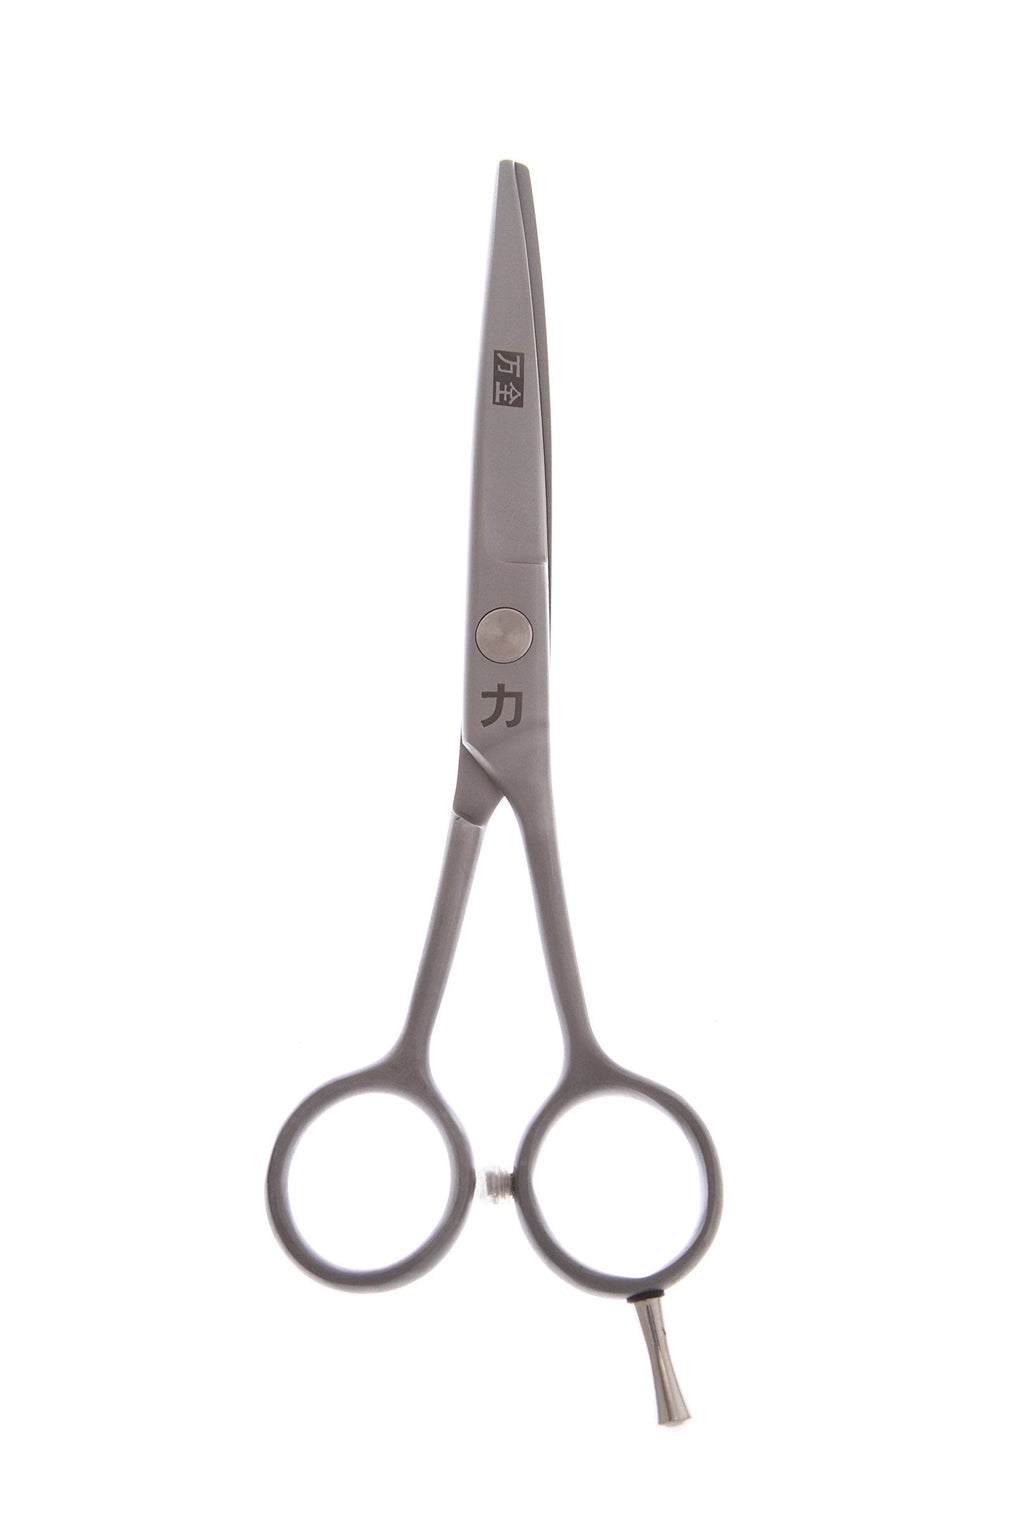 [Australia] - ShearsDirect Polished Finish Curved Cutting Shear with Opposing Handle, 6.5" 